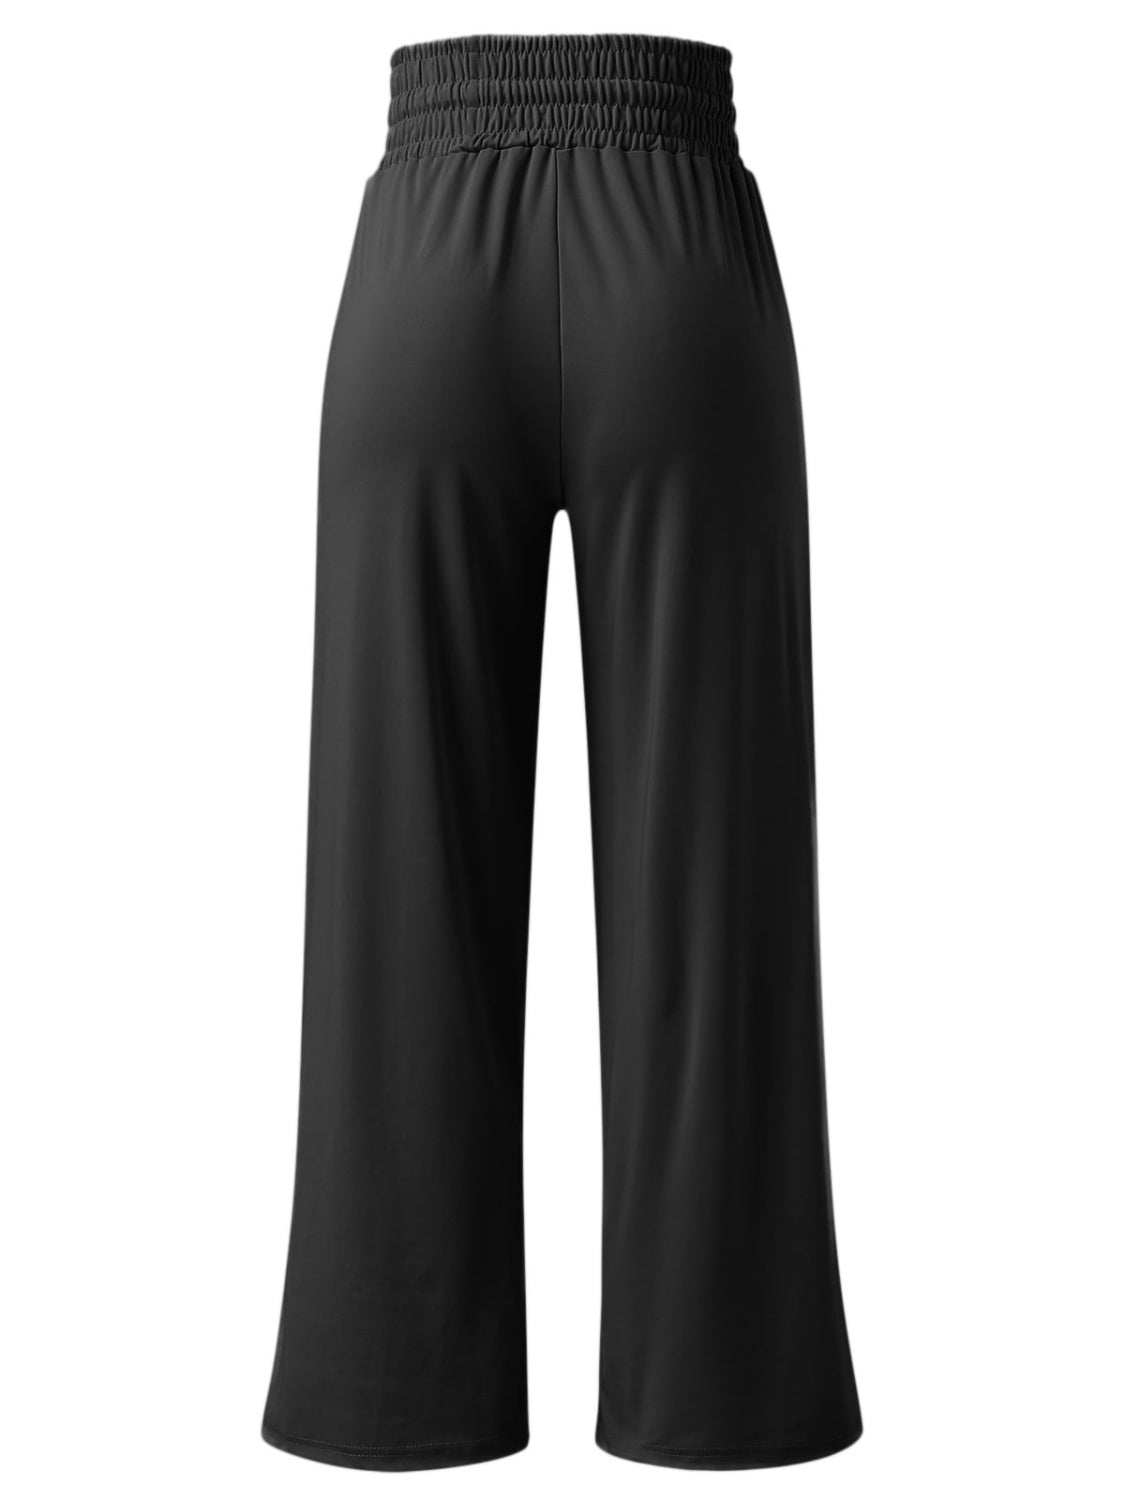 Comfortable wide-leg pants for women available in multiple colors.